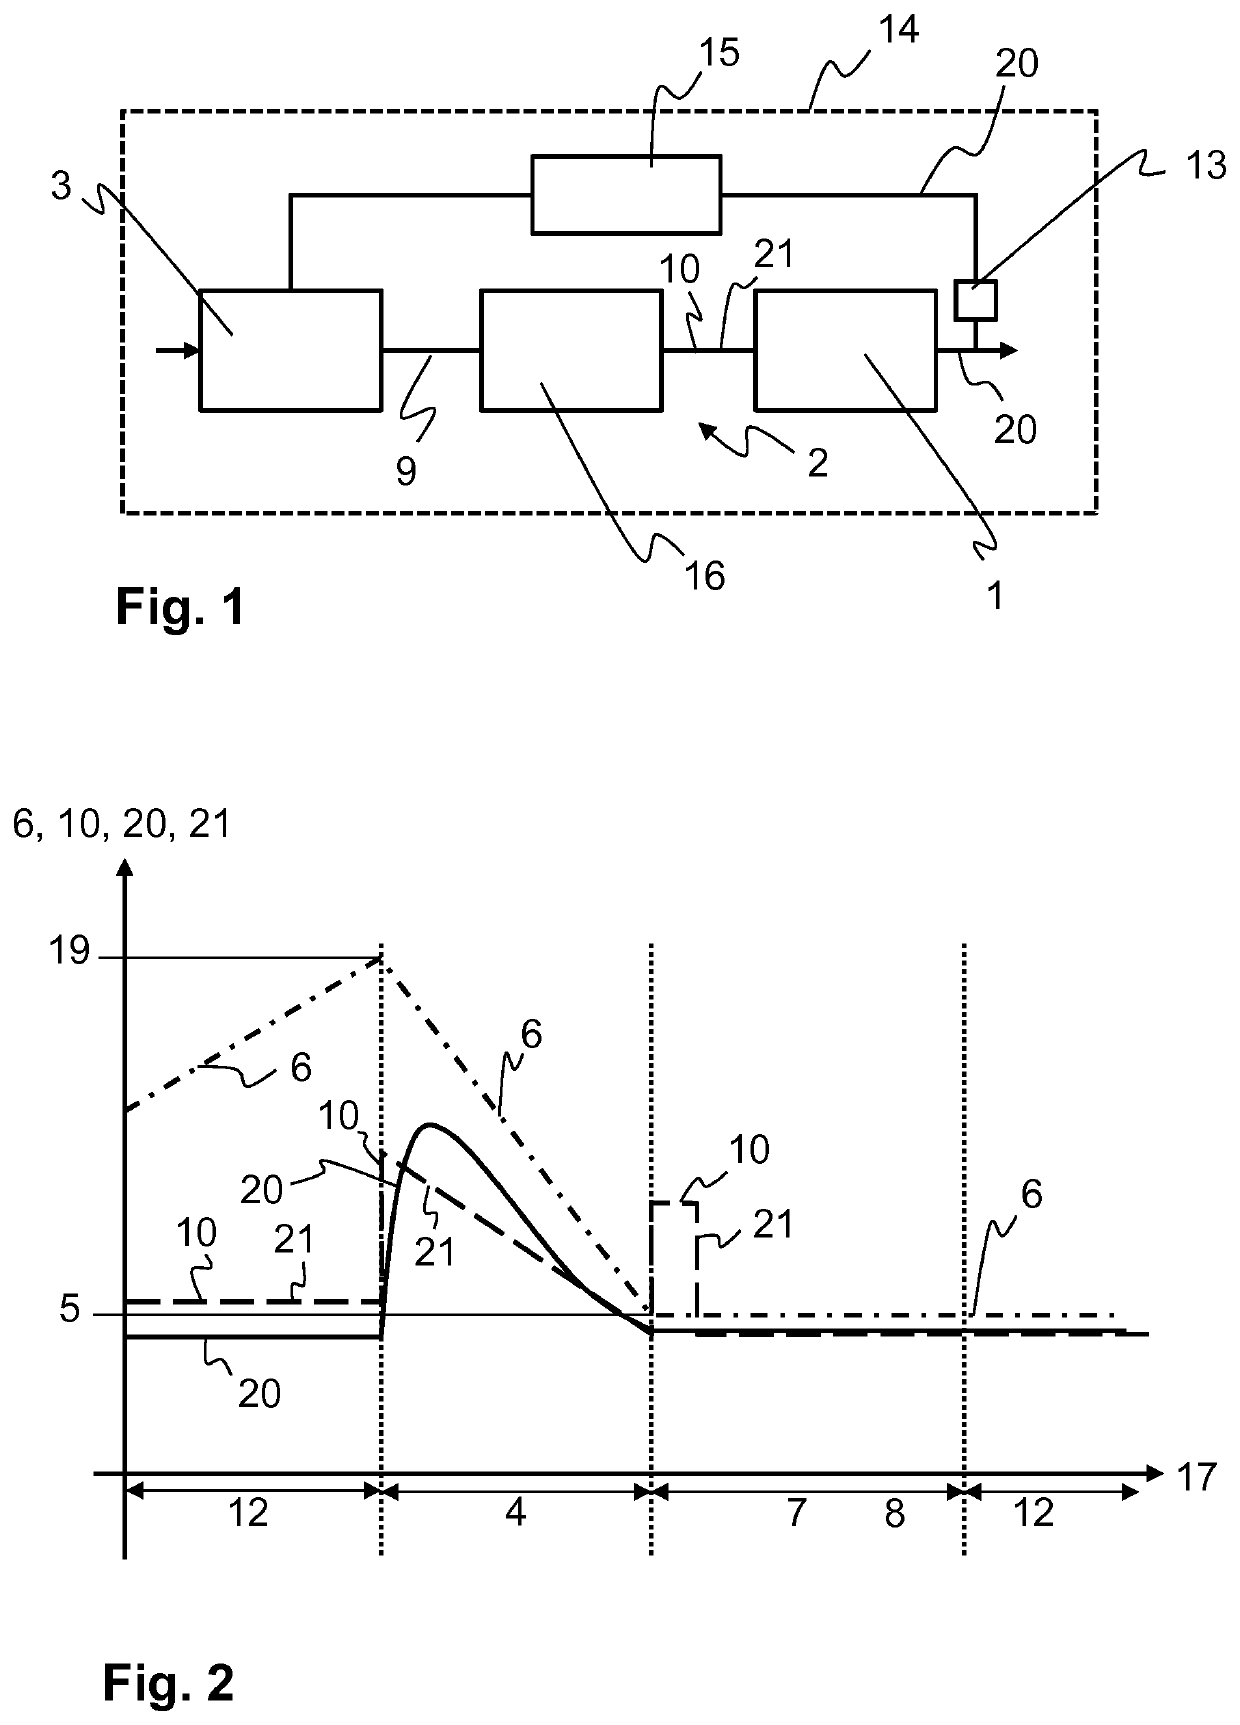 Method for regenerating a particle filter